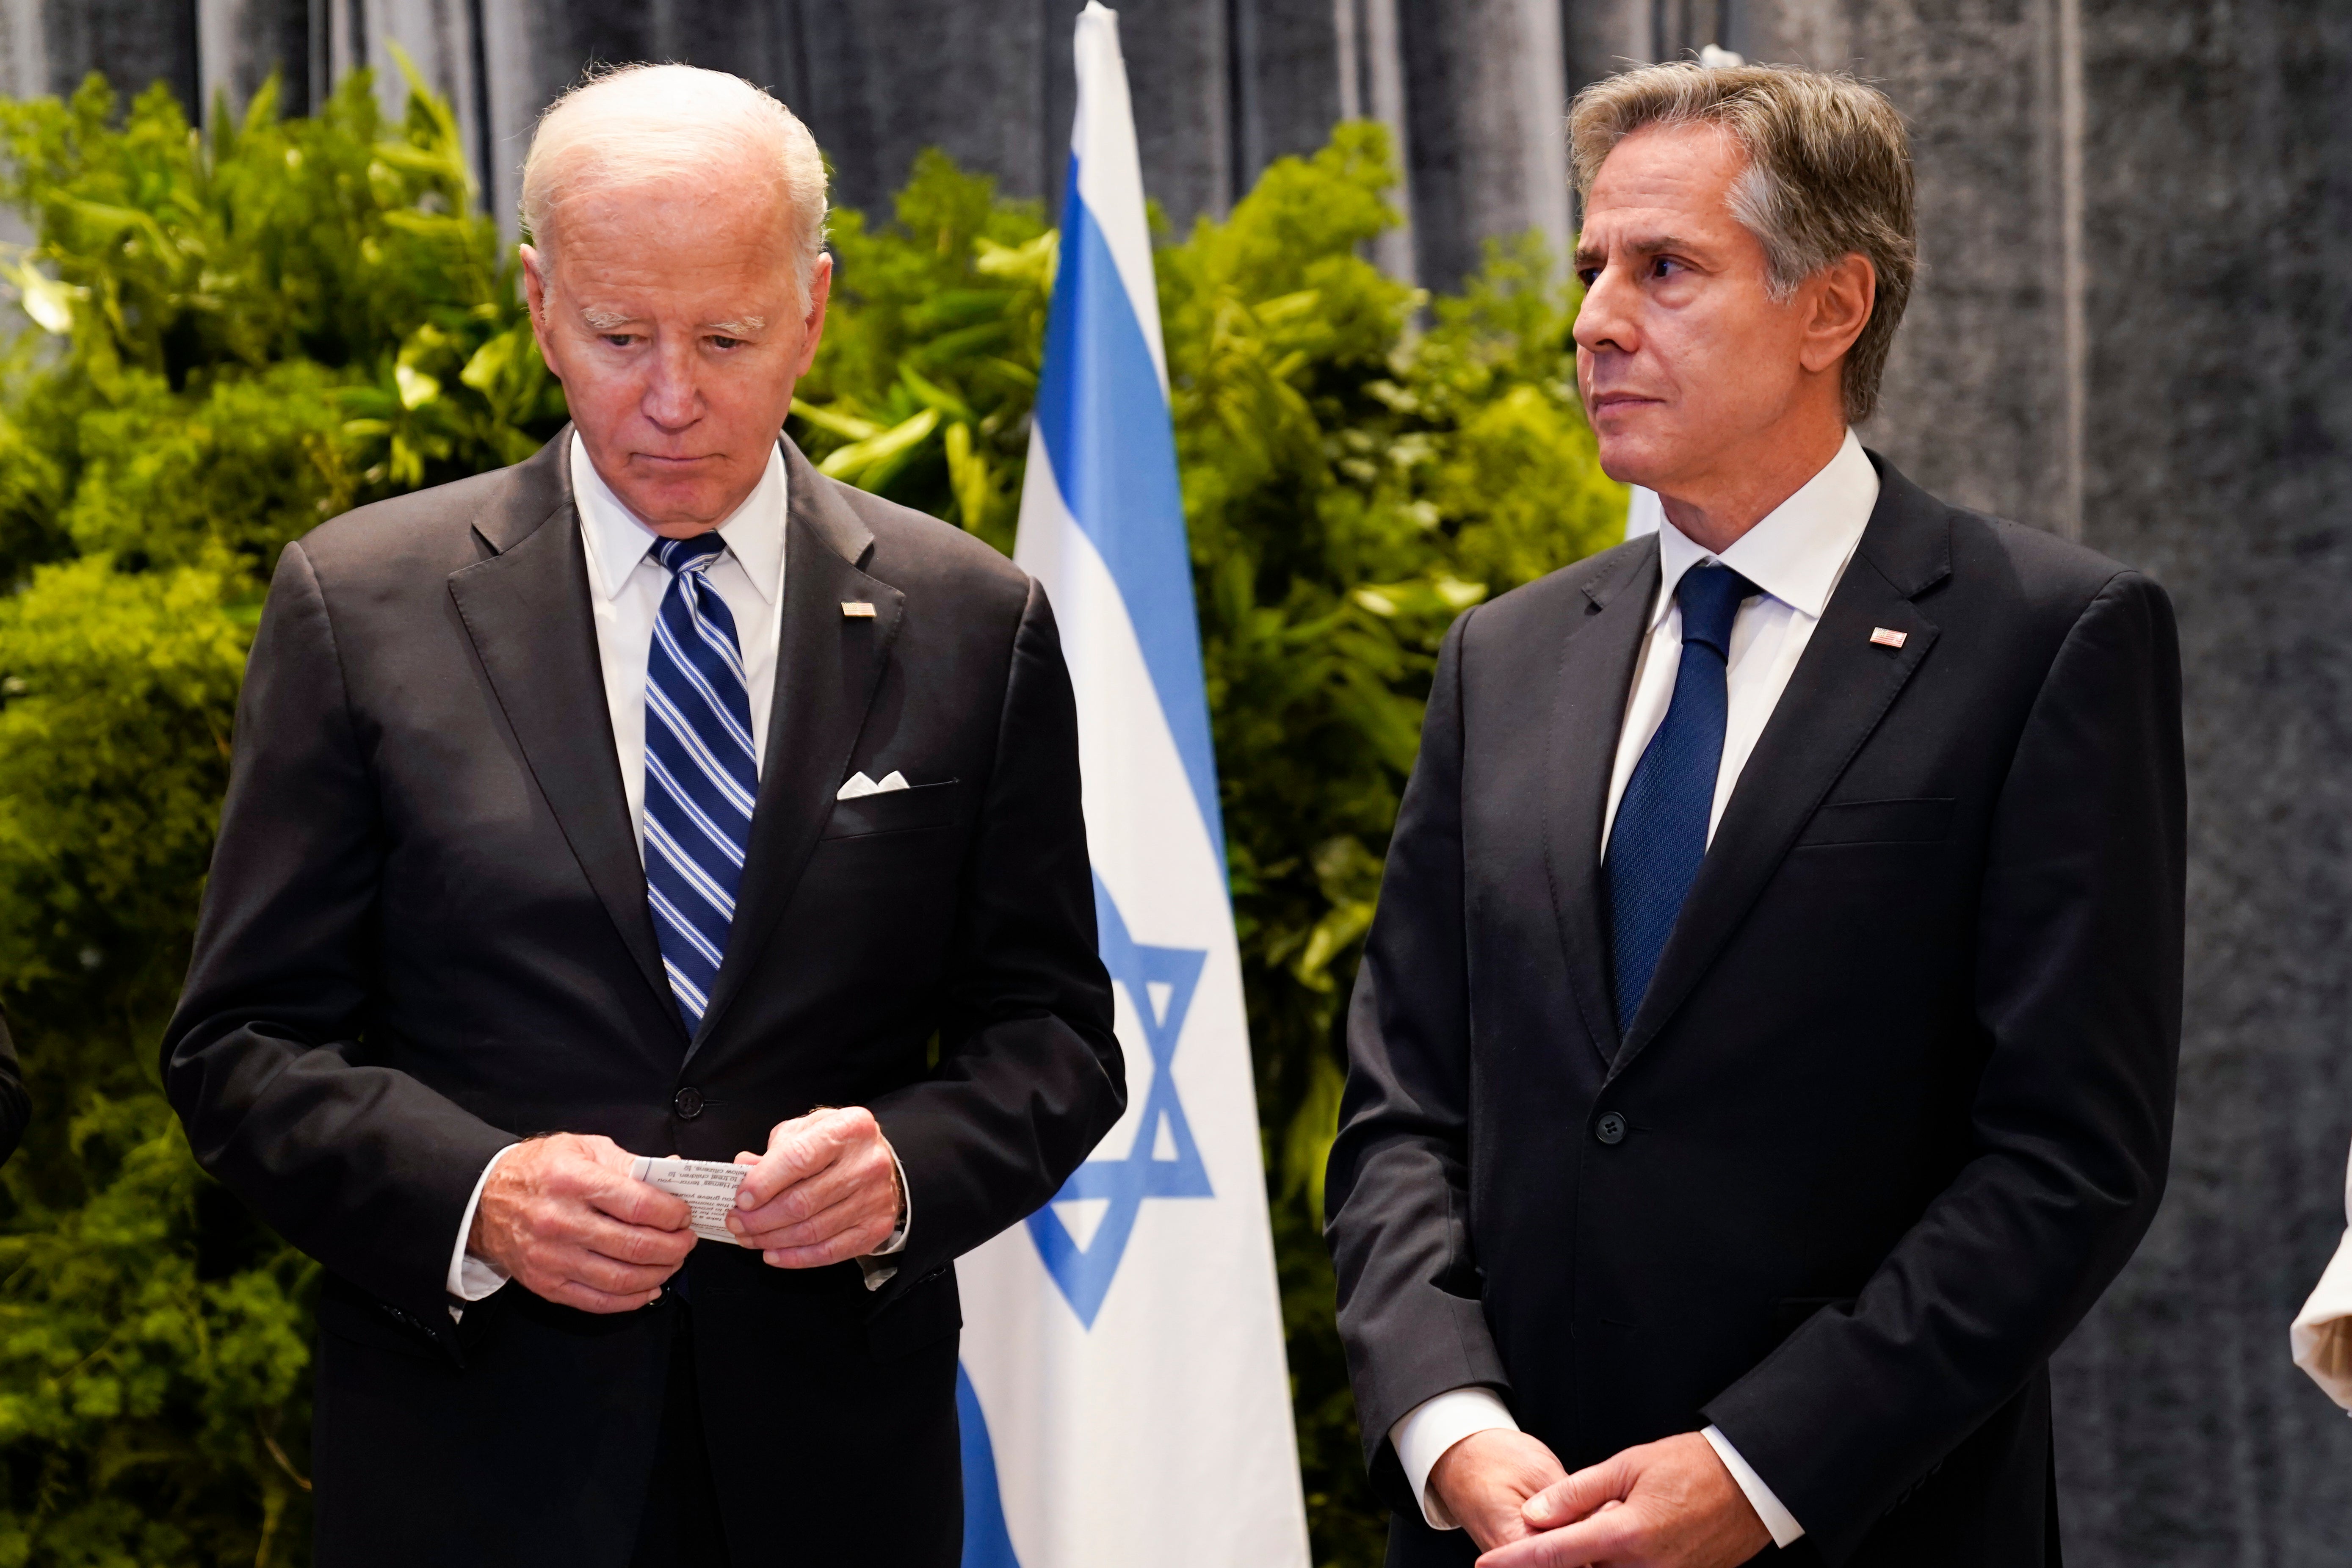 President Joe Biden and U.S. Secretary of State Antony Blinken stand together while meeting with victims’ relatives and first responders in Tel Aviv